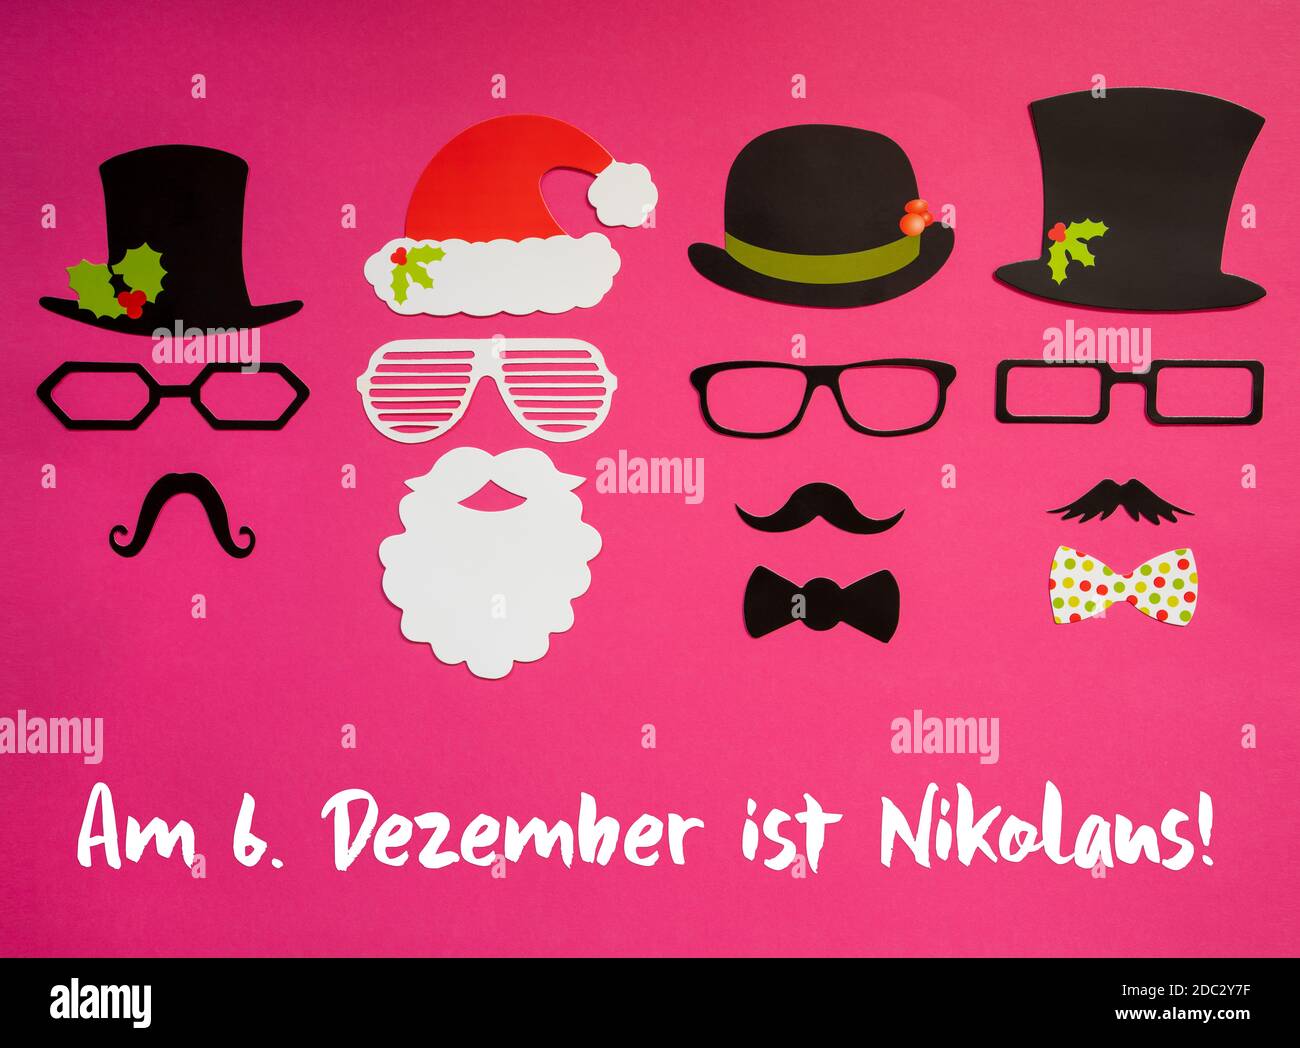 German Text Am Sechsten Dezember Ist Nikolaus Means Nicholas Day Is At December 6th. Santa Claus Mask And Three Cartoon Mask With Hat, Glasses And Bow Stock Photo